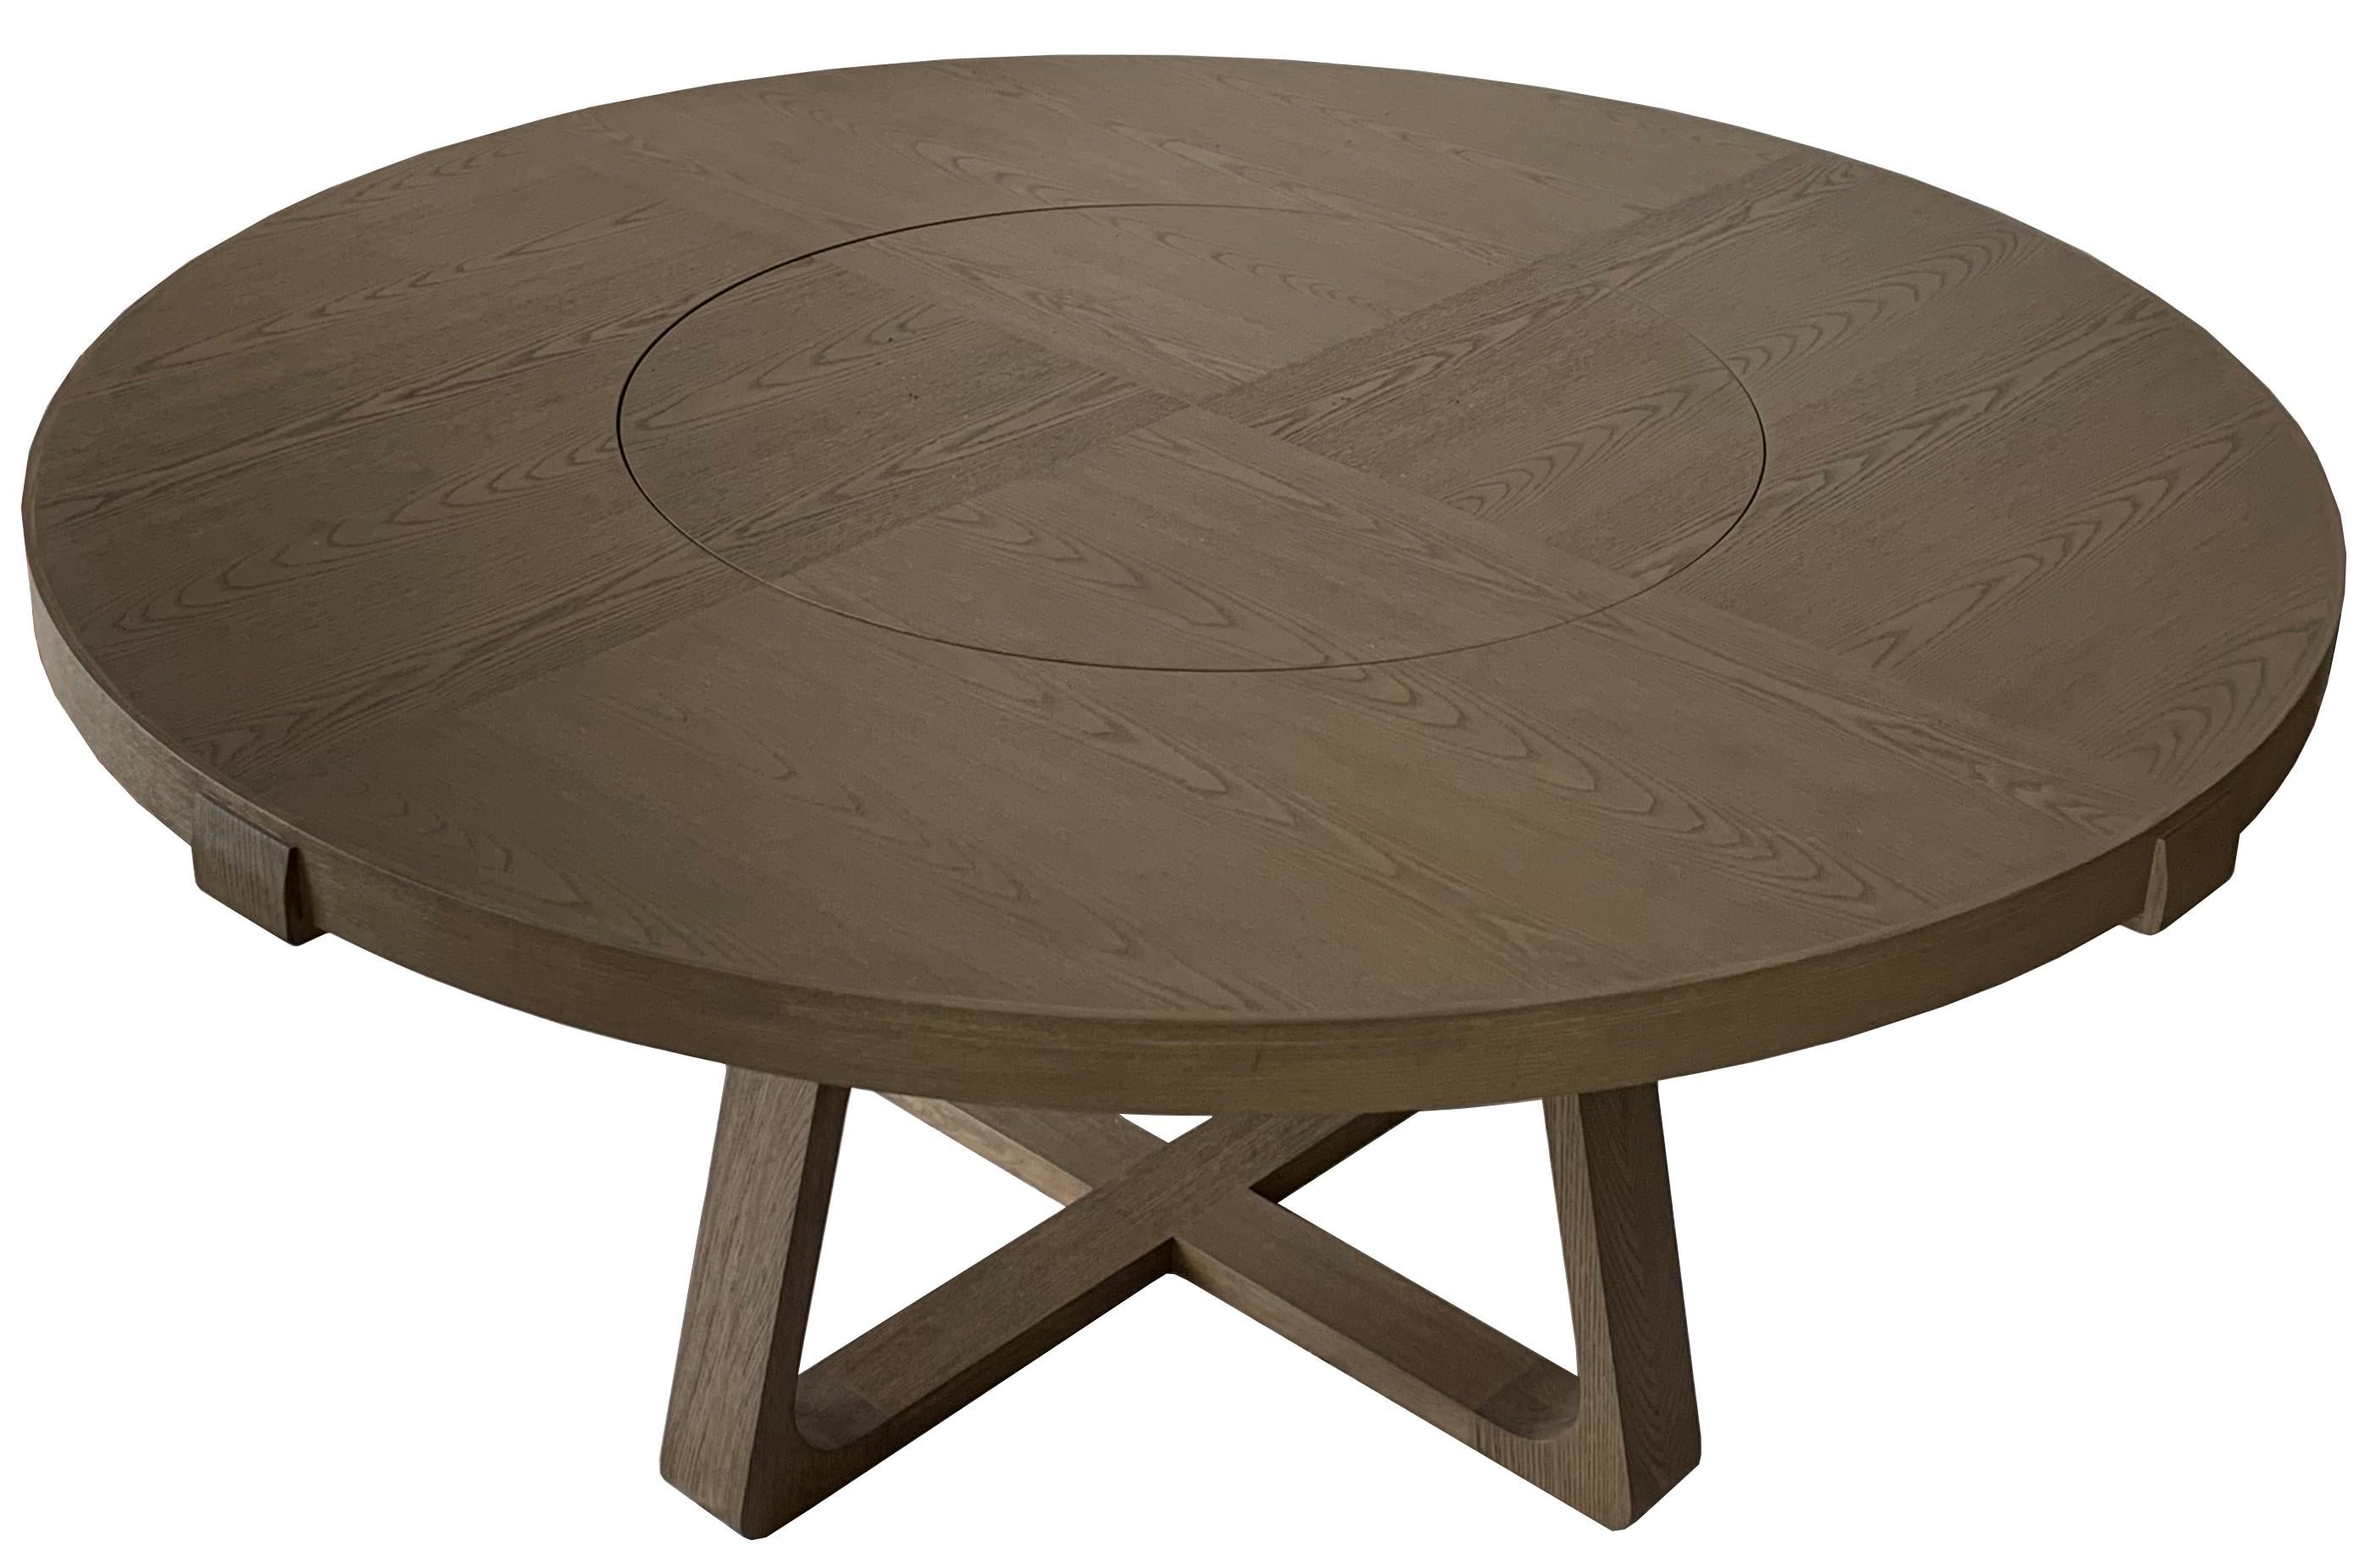 Round wooden dining table 150cm with Lazy Susan in the middle.
Removable Lazy Susan for cleaning purpose.
Available other sizes upon request.
Available without Lazy Susan.

Description: Round dining table with Lazy Susan
Color: Grey
Size: 150Ø x 73